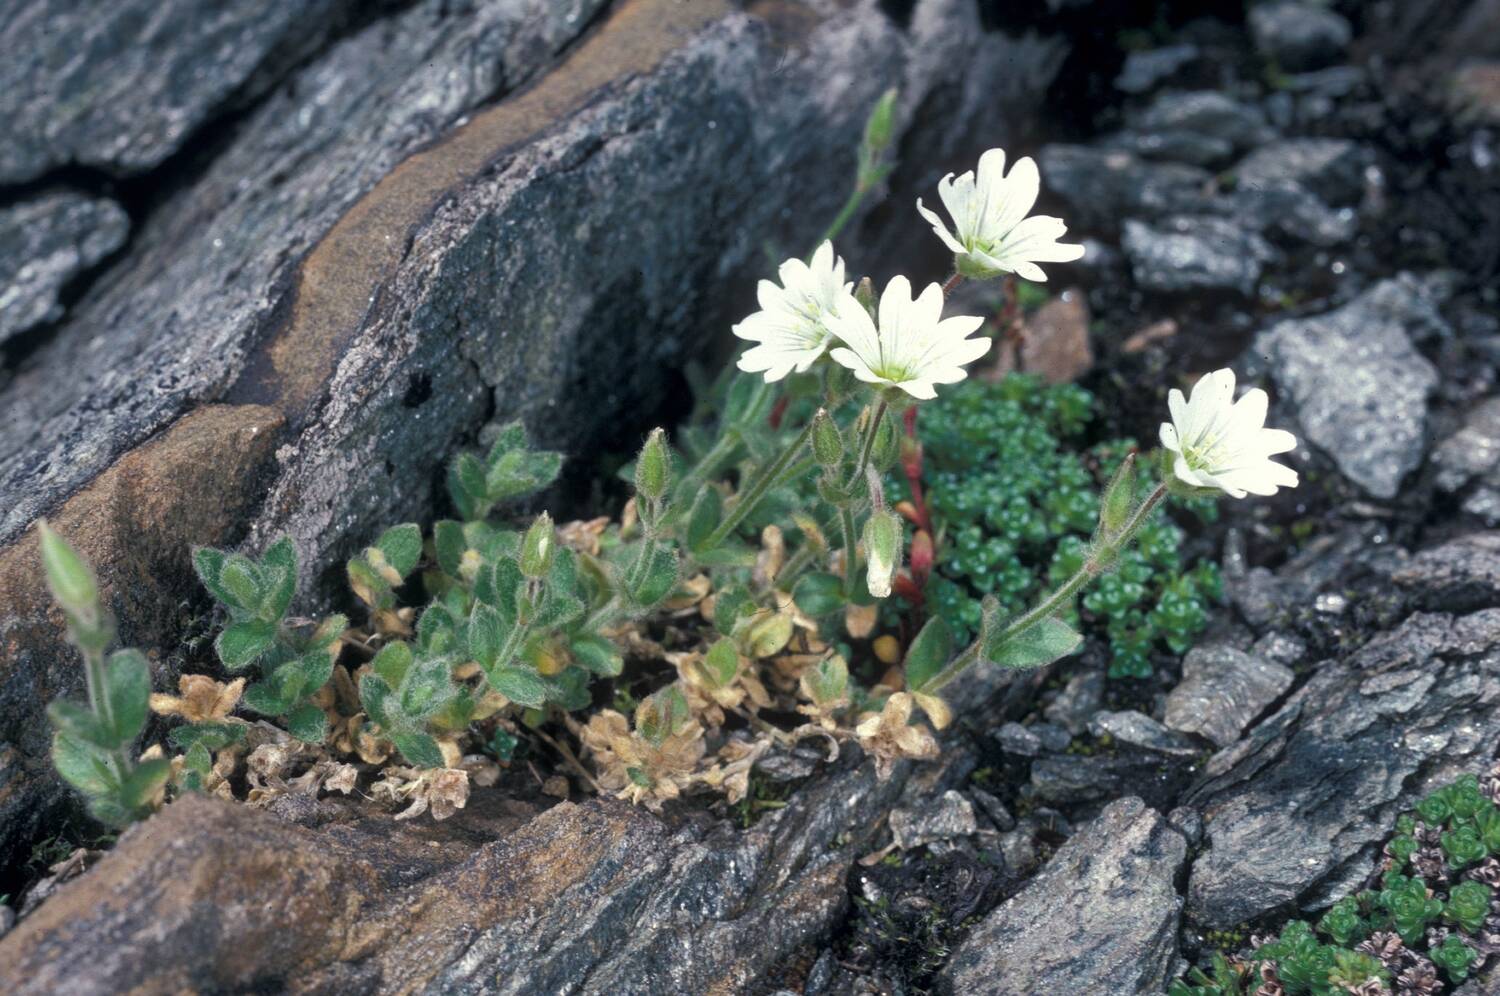 A small white-flowered alpine plant growing in a rocky place.